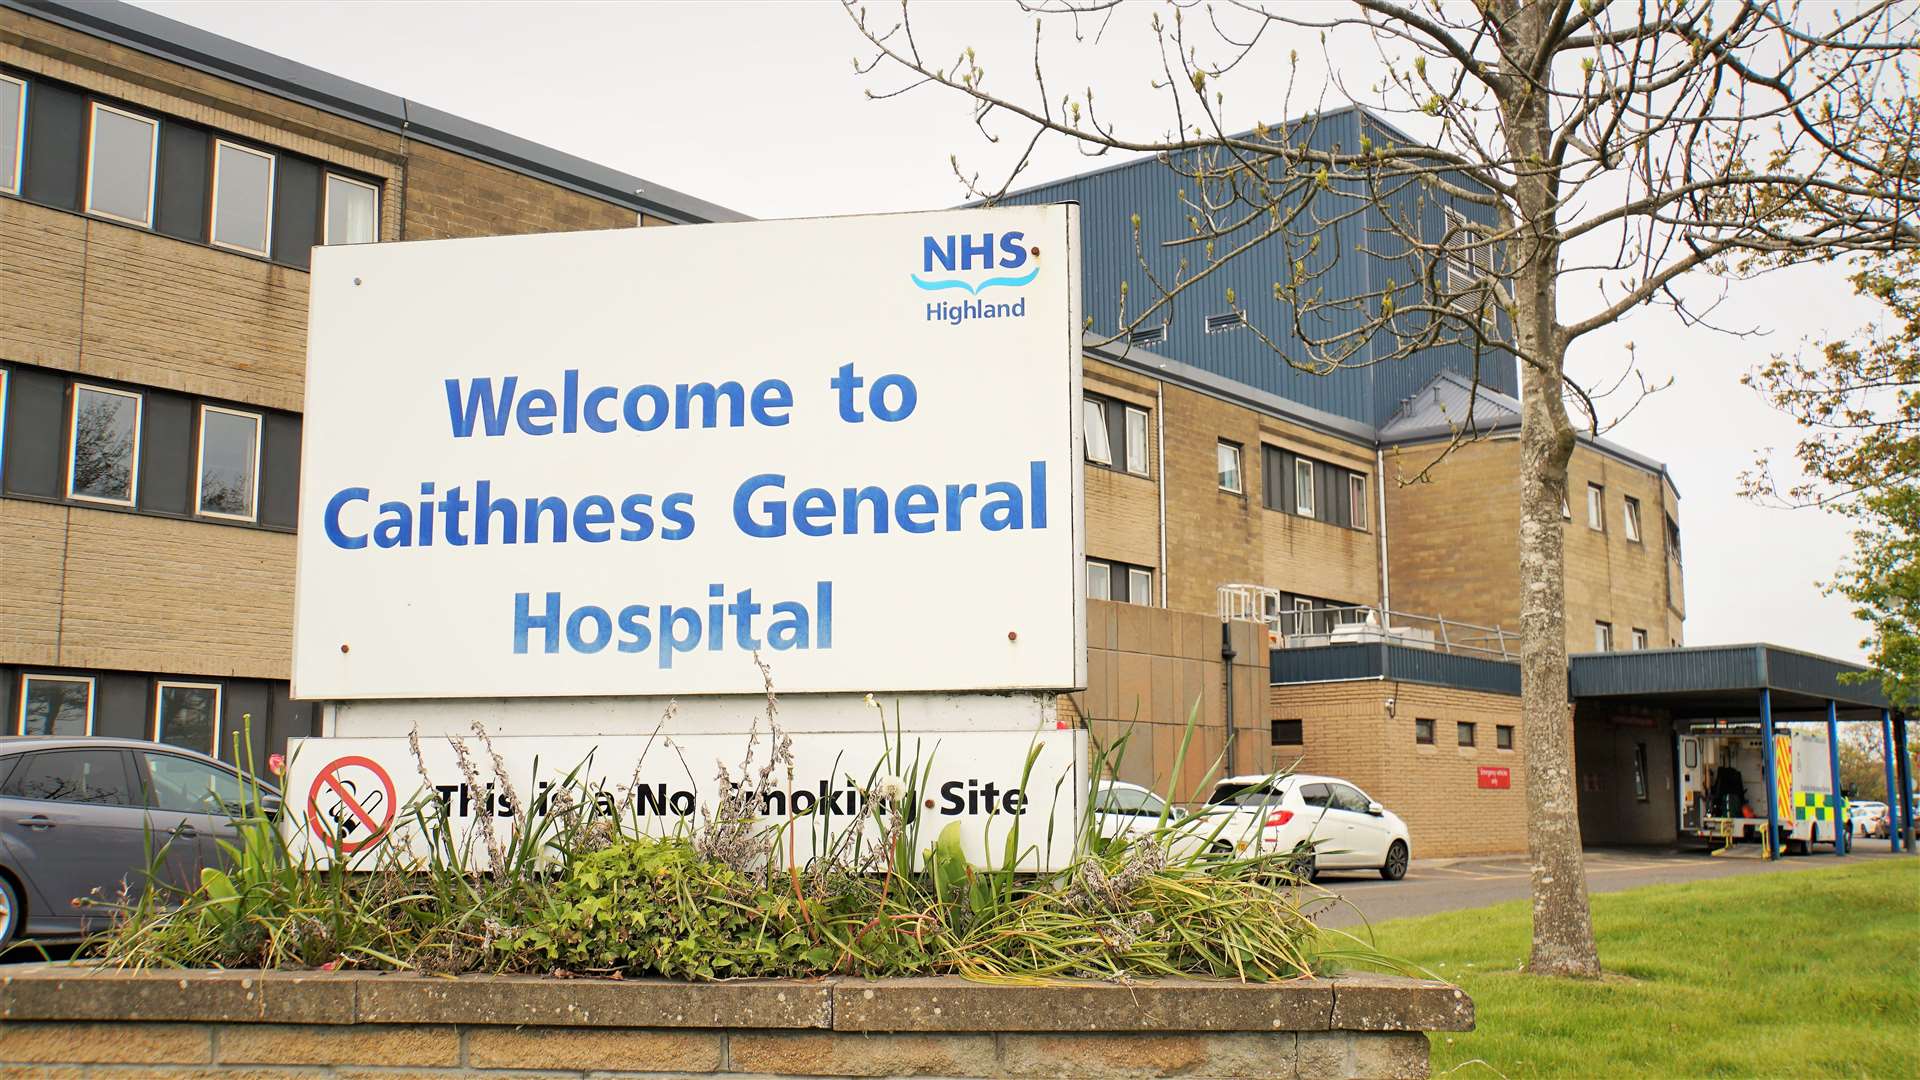 Caithness General Hospital should be restored to its former capabilities, claims MP.